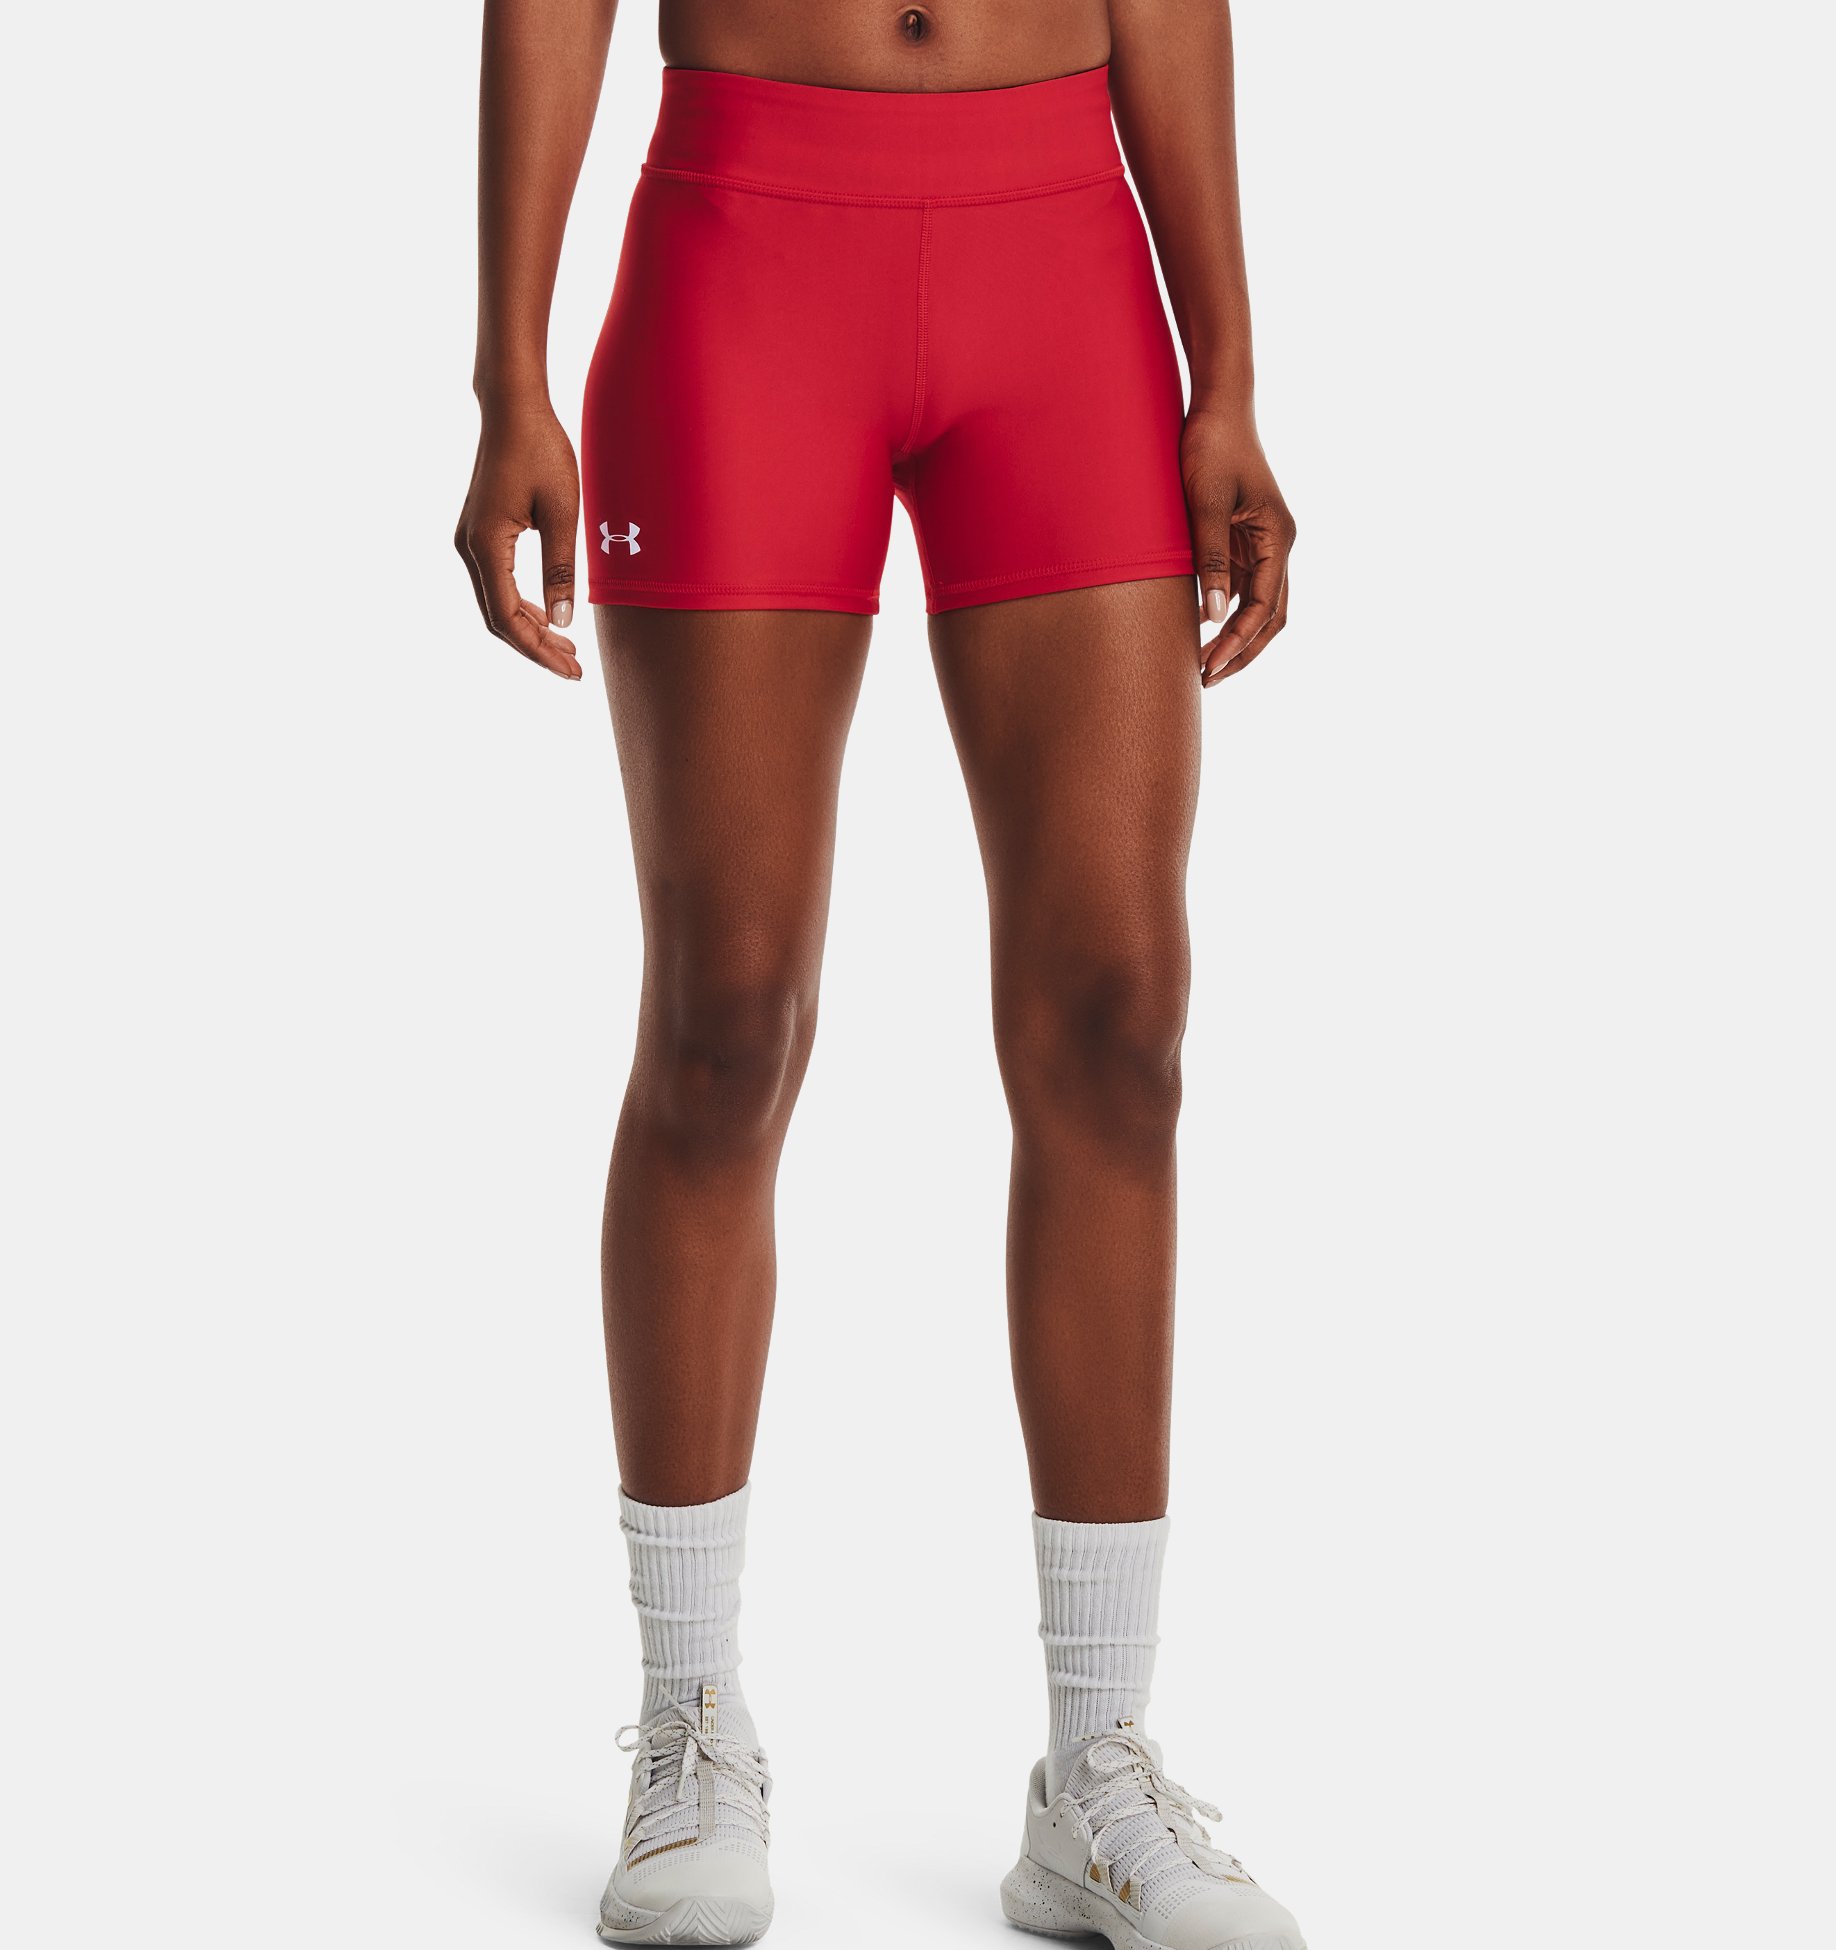 beans beach I was surprised Women's UA Team Shorty 4" Shorts | Under Armour